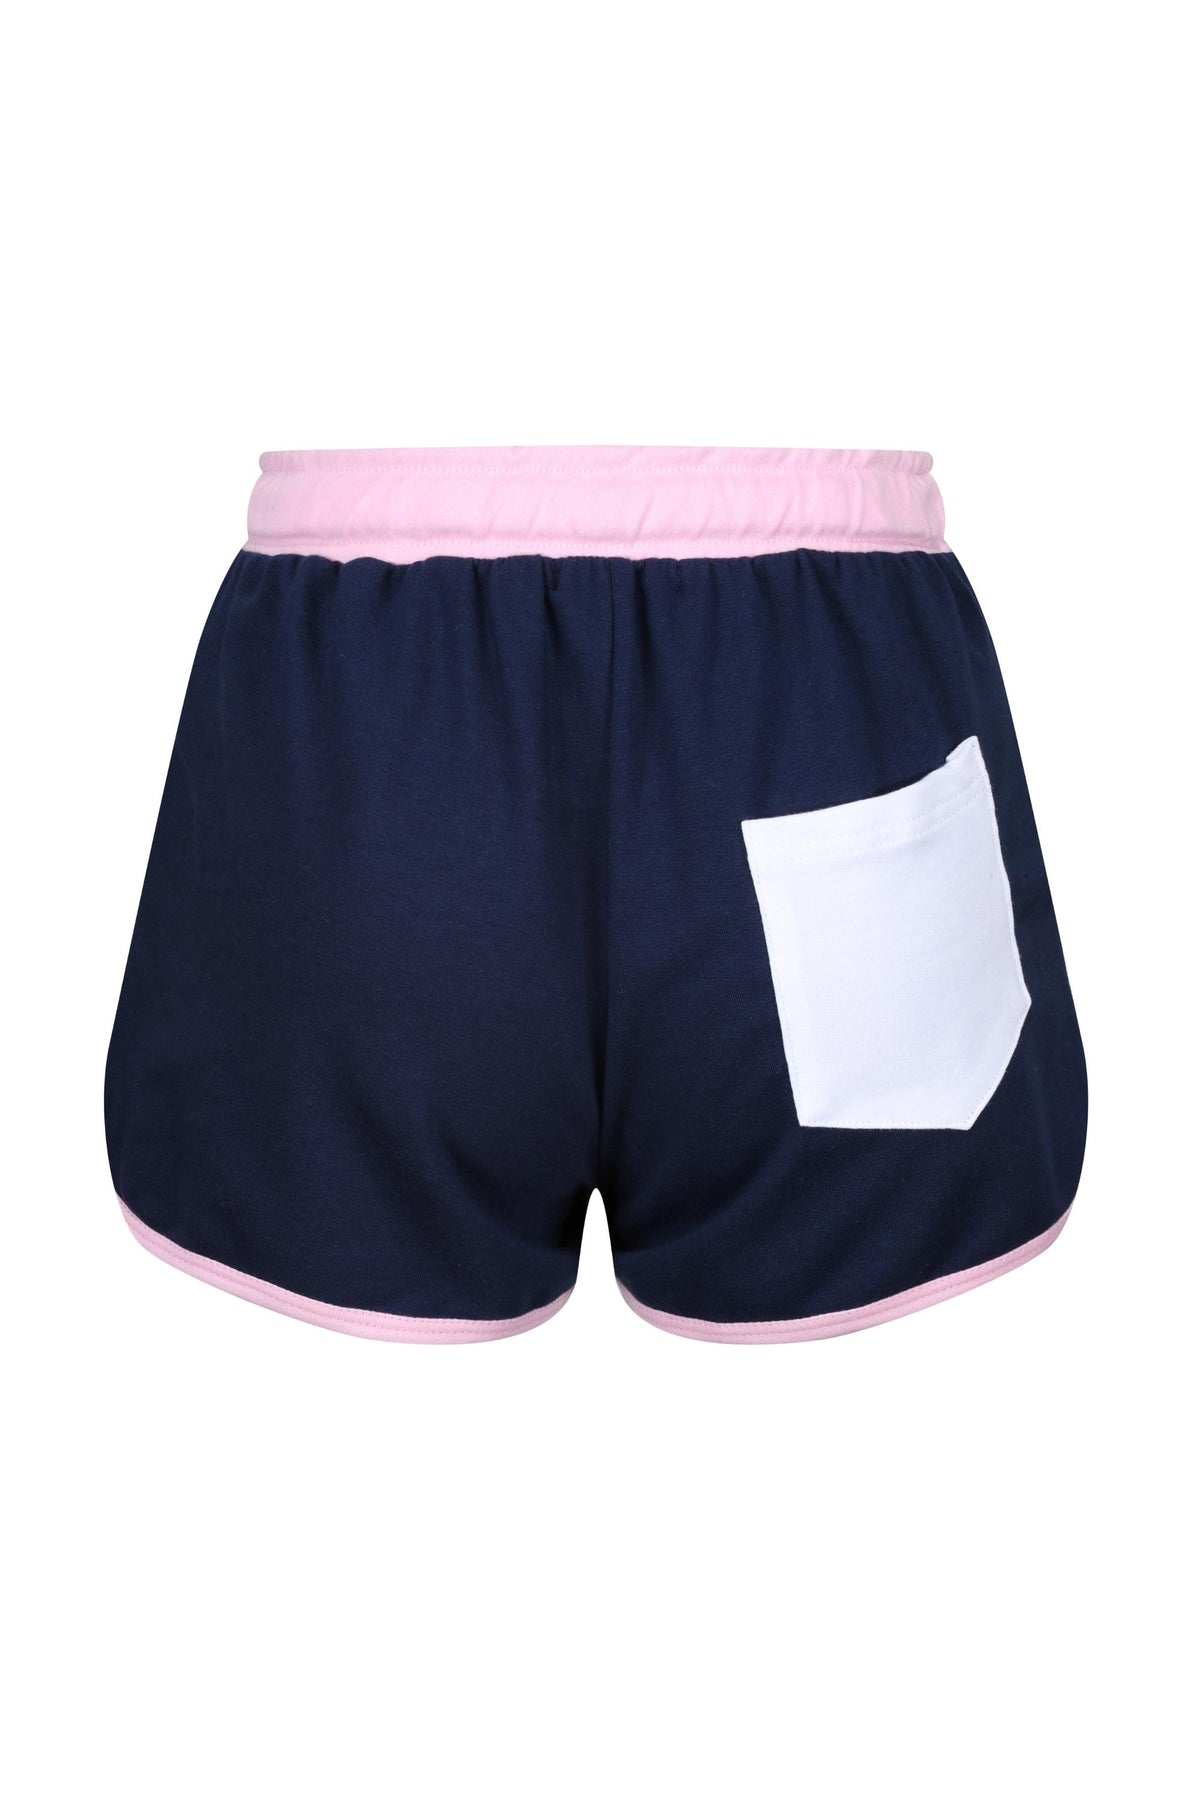 St Ives Shorts - Navy - Whale Of A Time Clothing